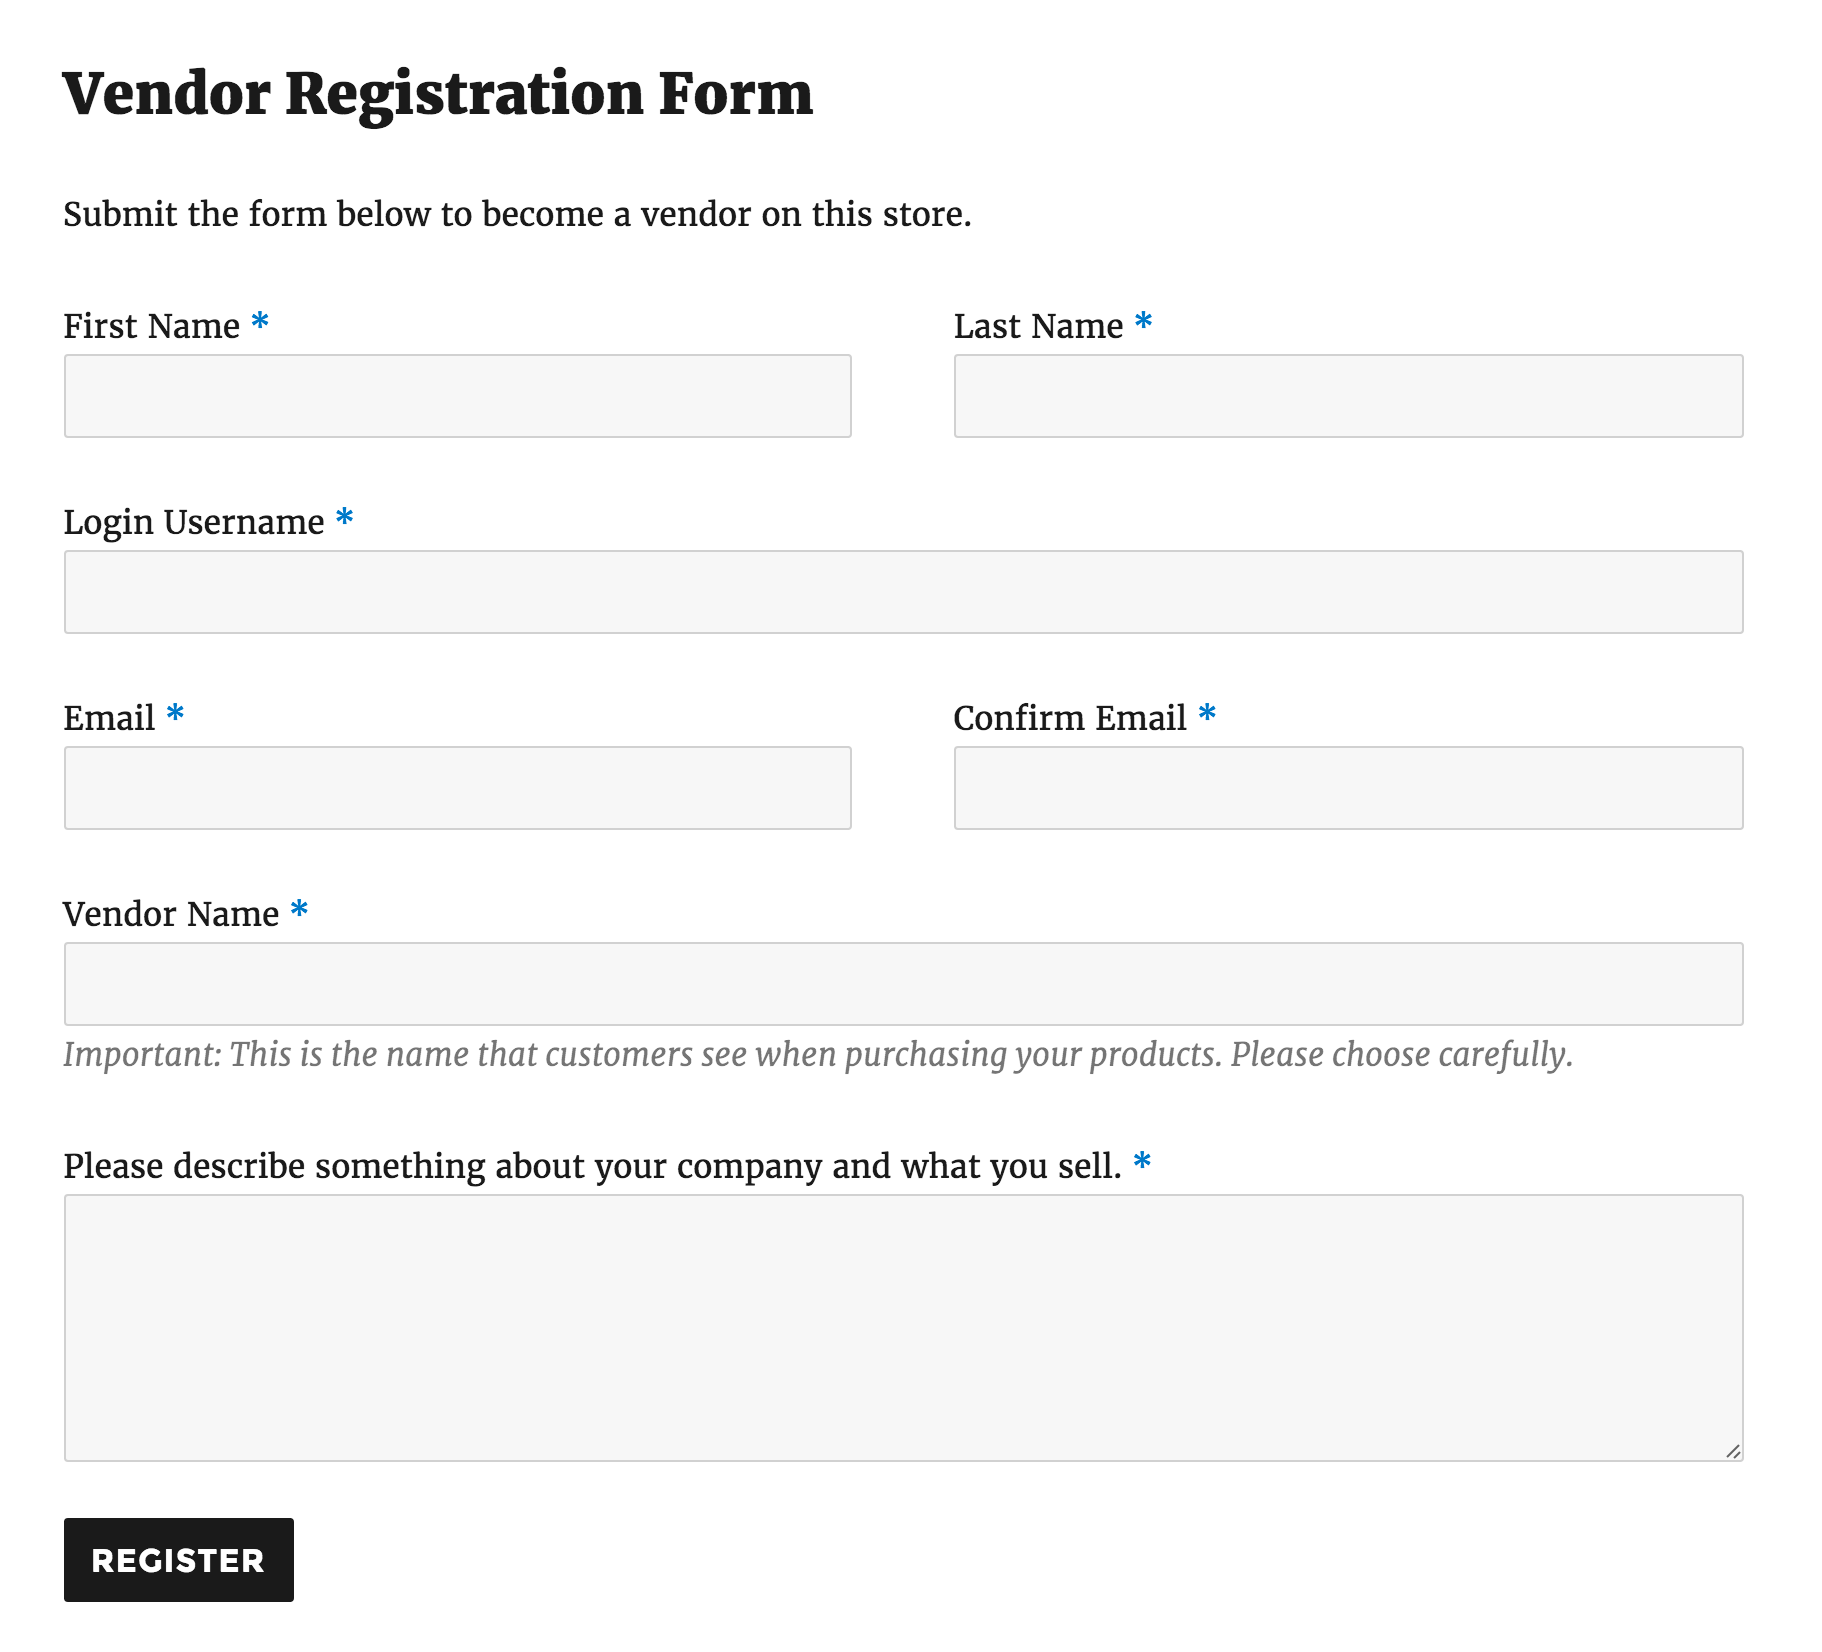 With a simple shortcode, you can display a vendor registration form on your store.